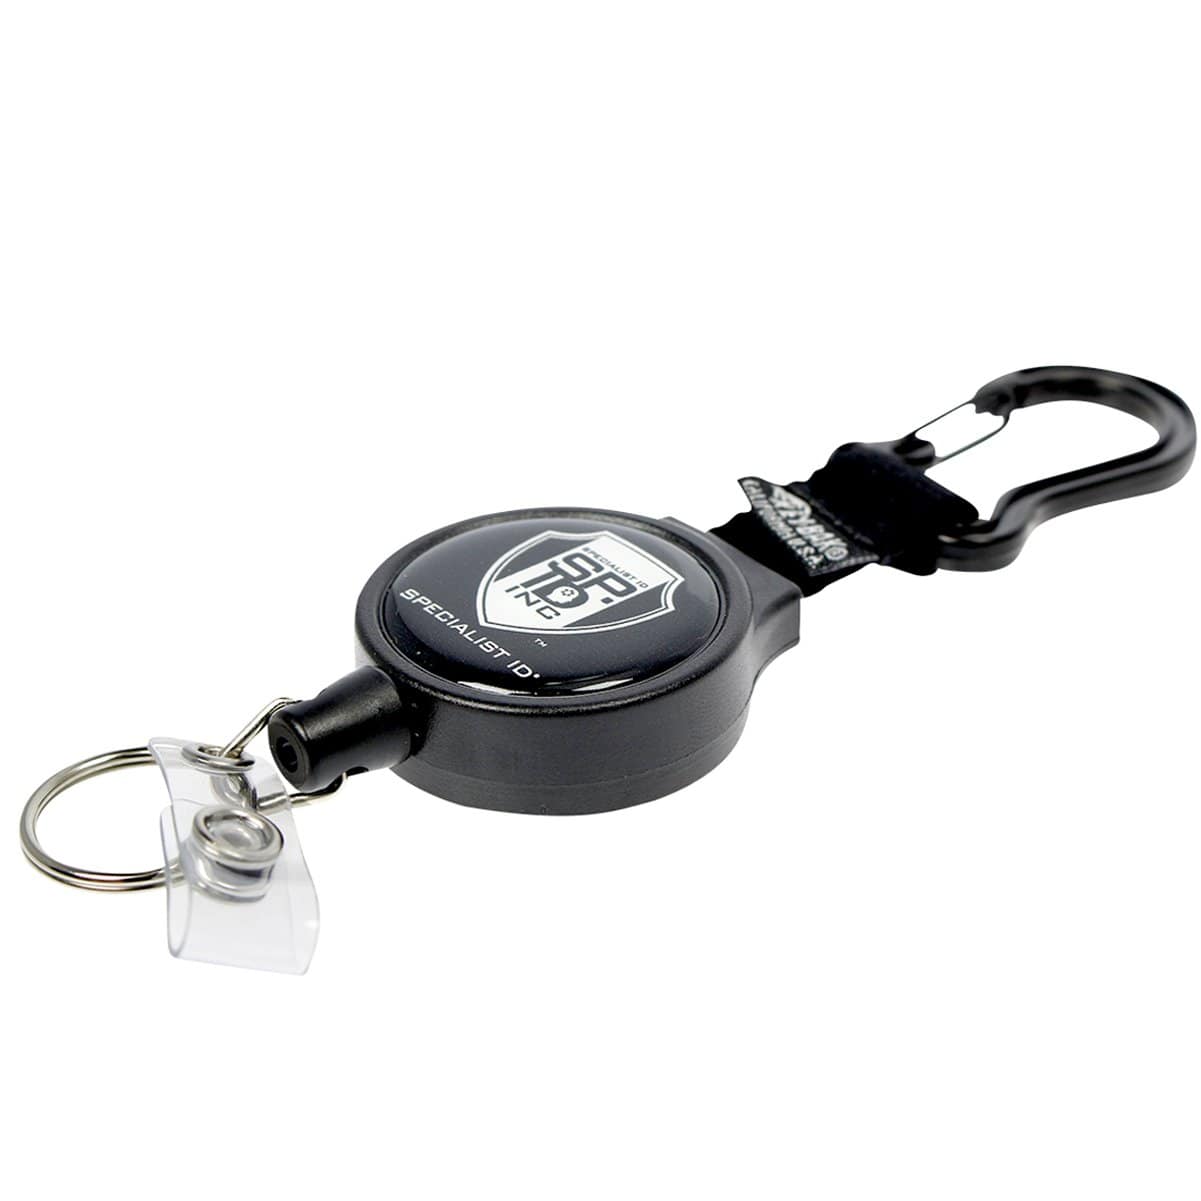 Specialist ID 5 Pack - Heavy Duty Retractable Badge Reels with ID